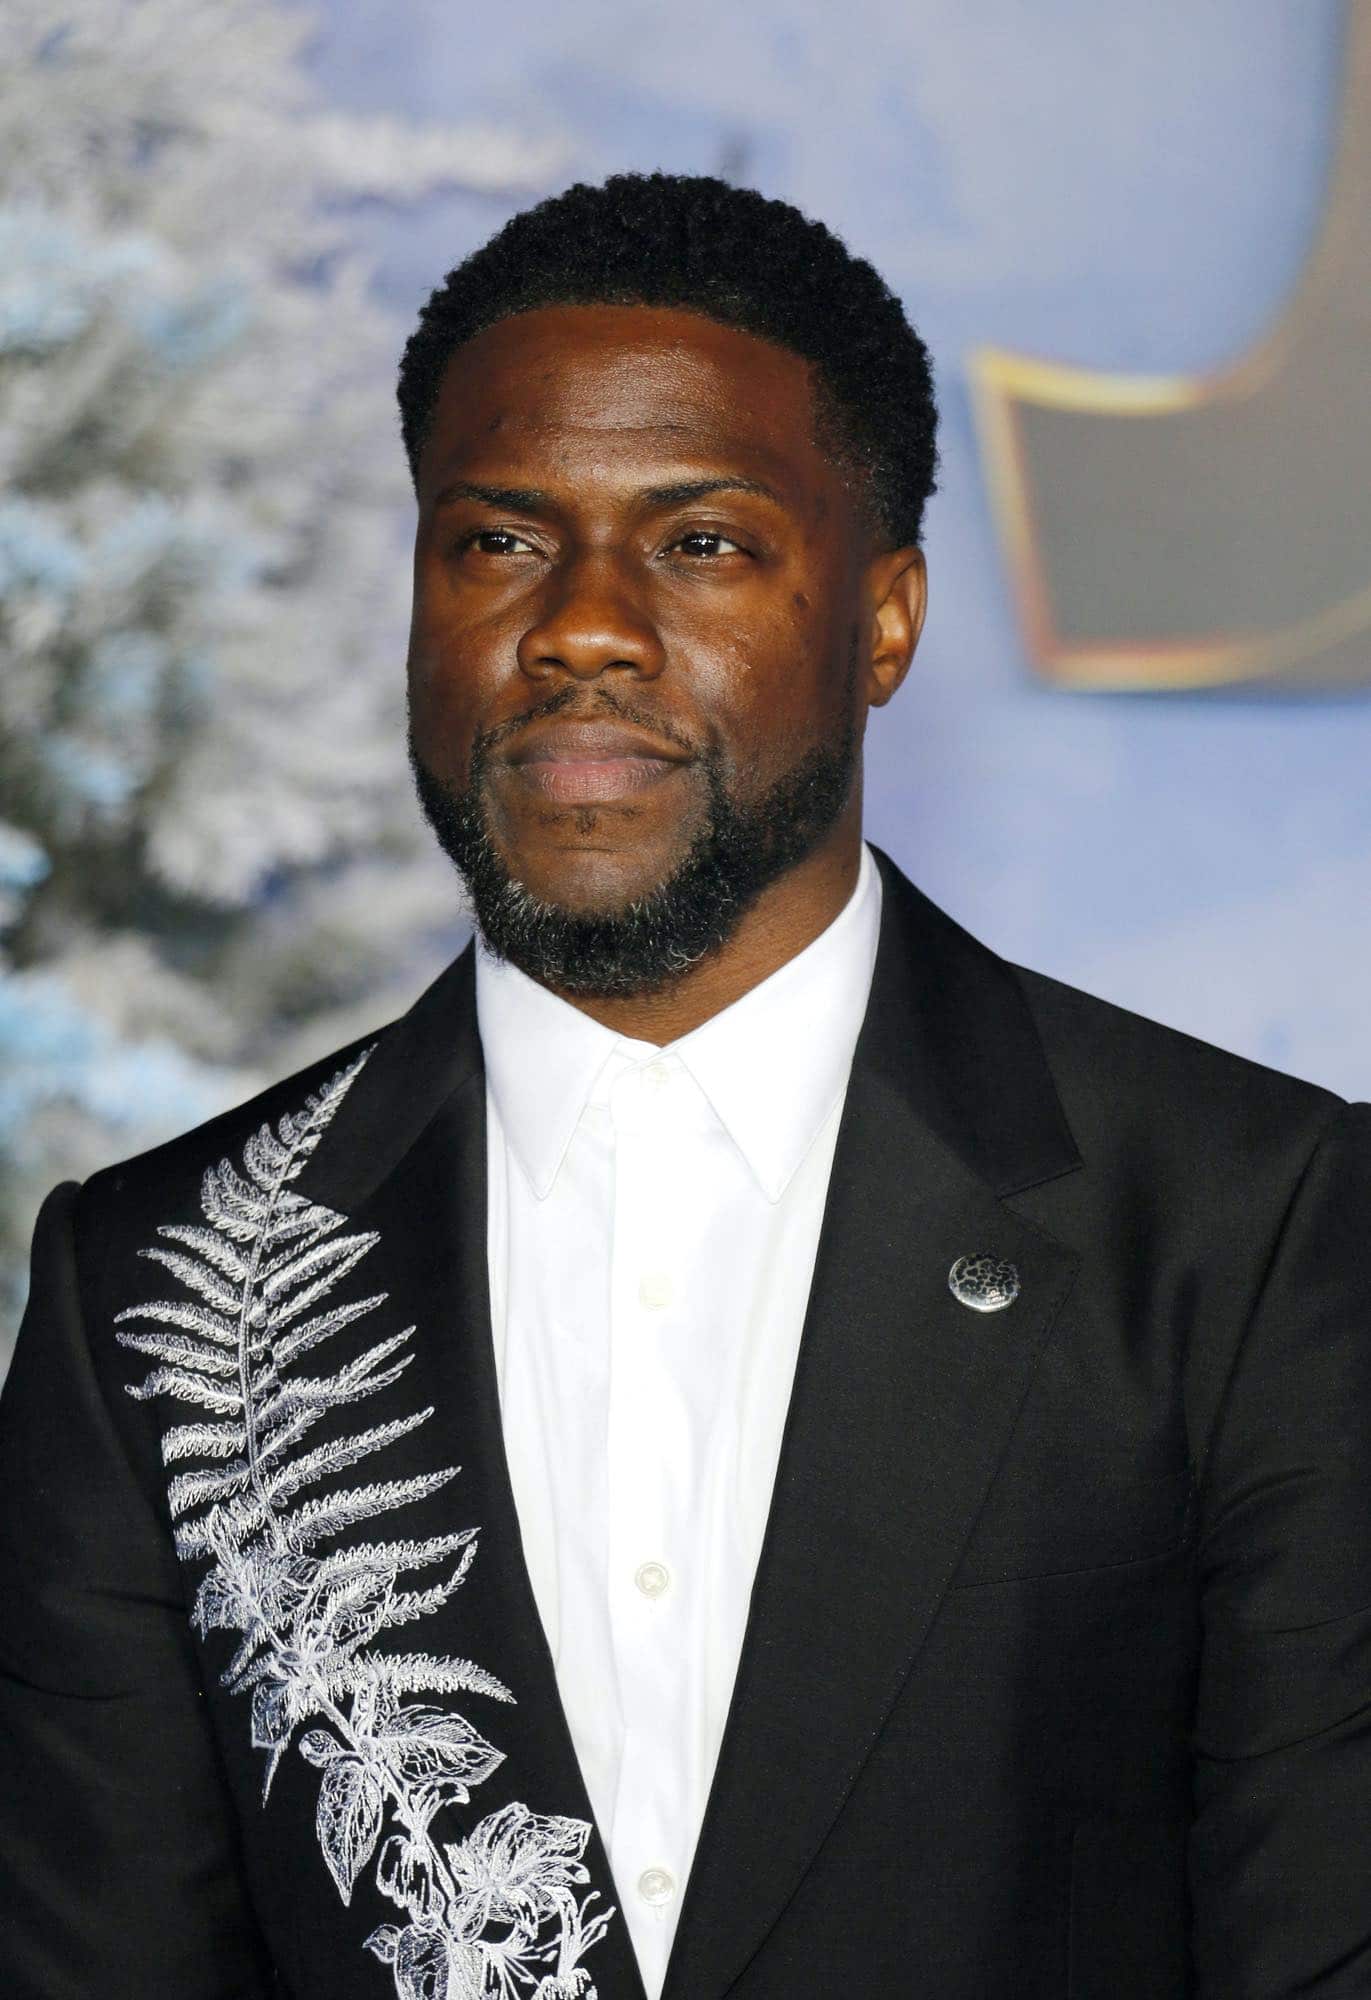 Hart height kevin Kevin Hart